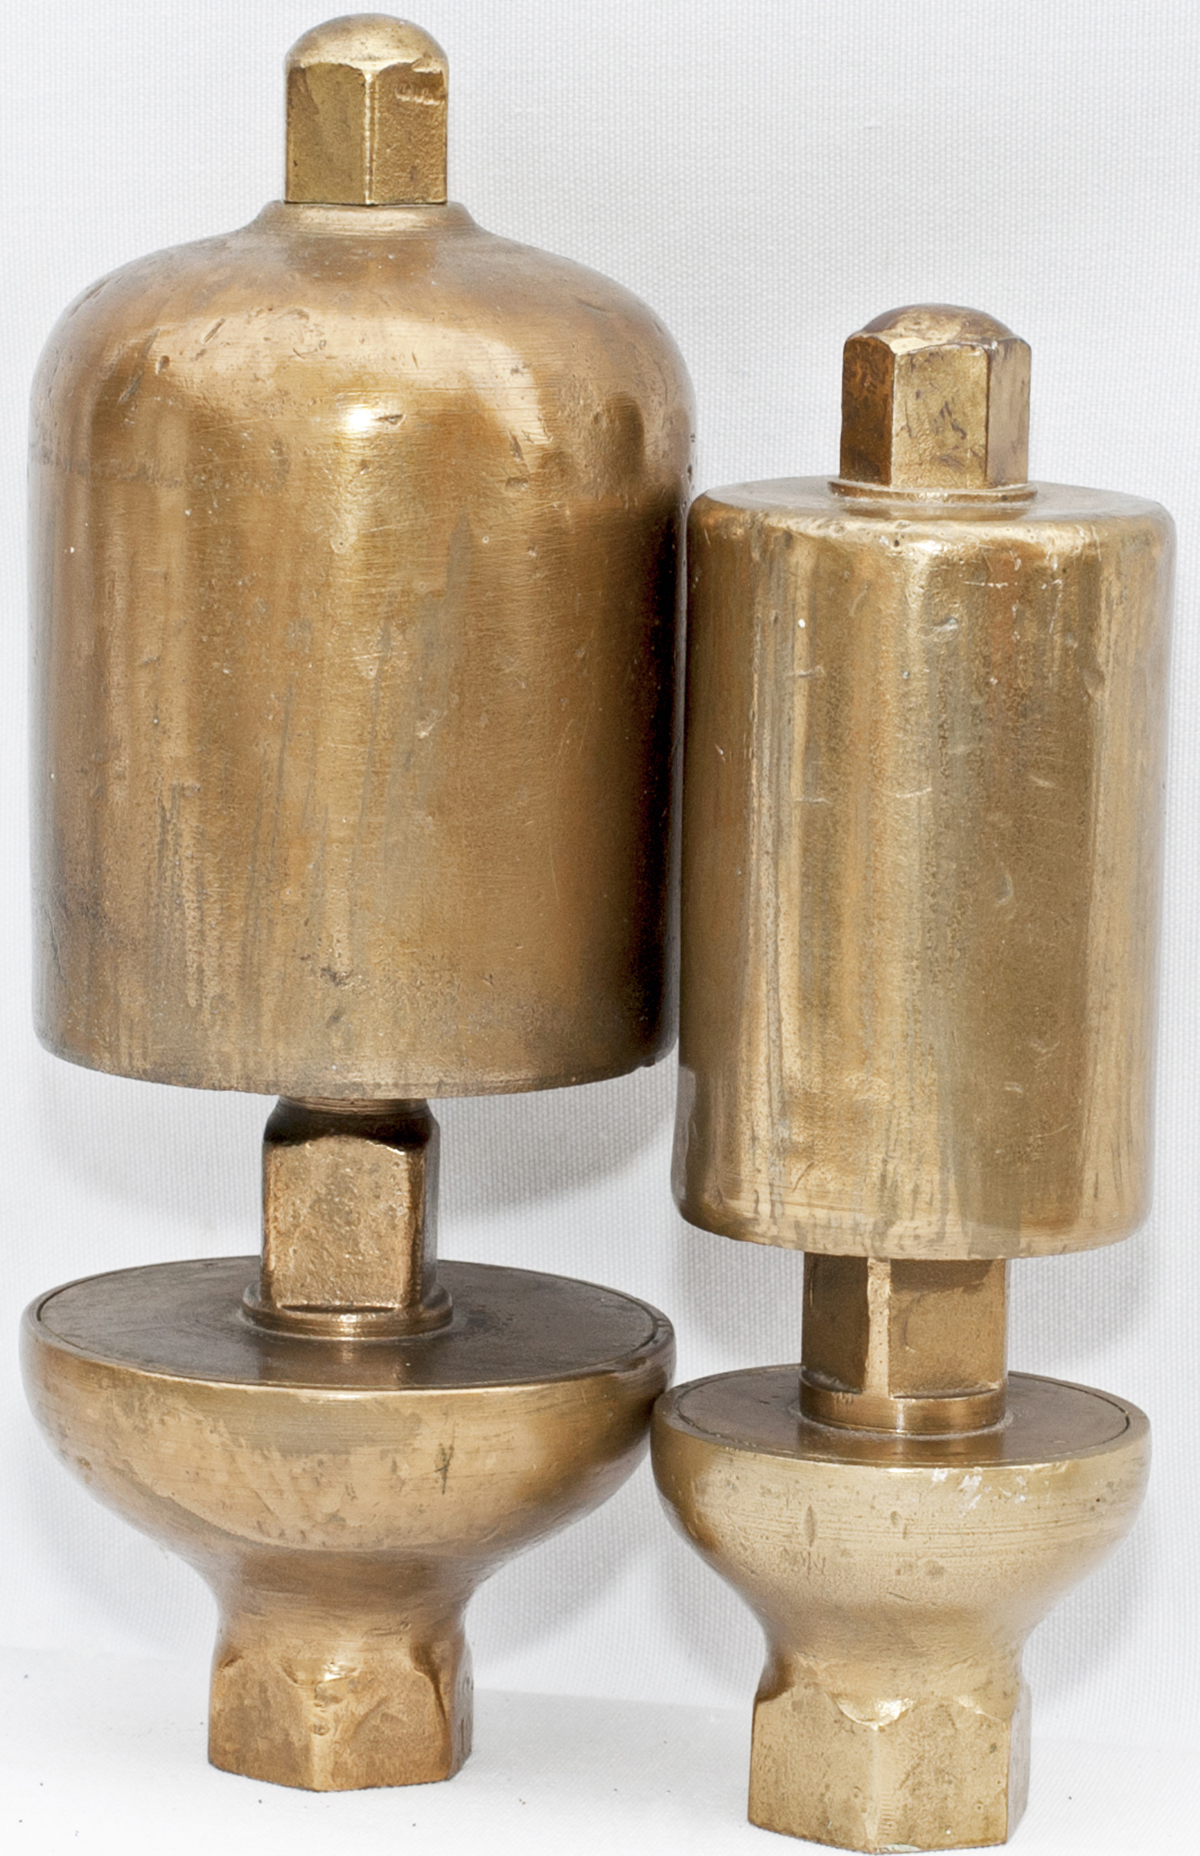 A pair of GWR locomotive brass whistles, large and small variety. The larger one is stamped GWR